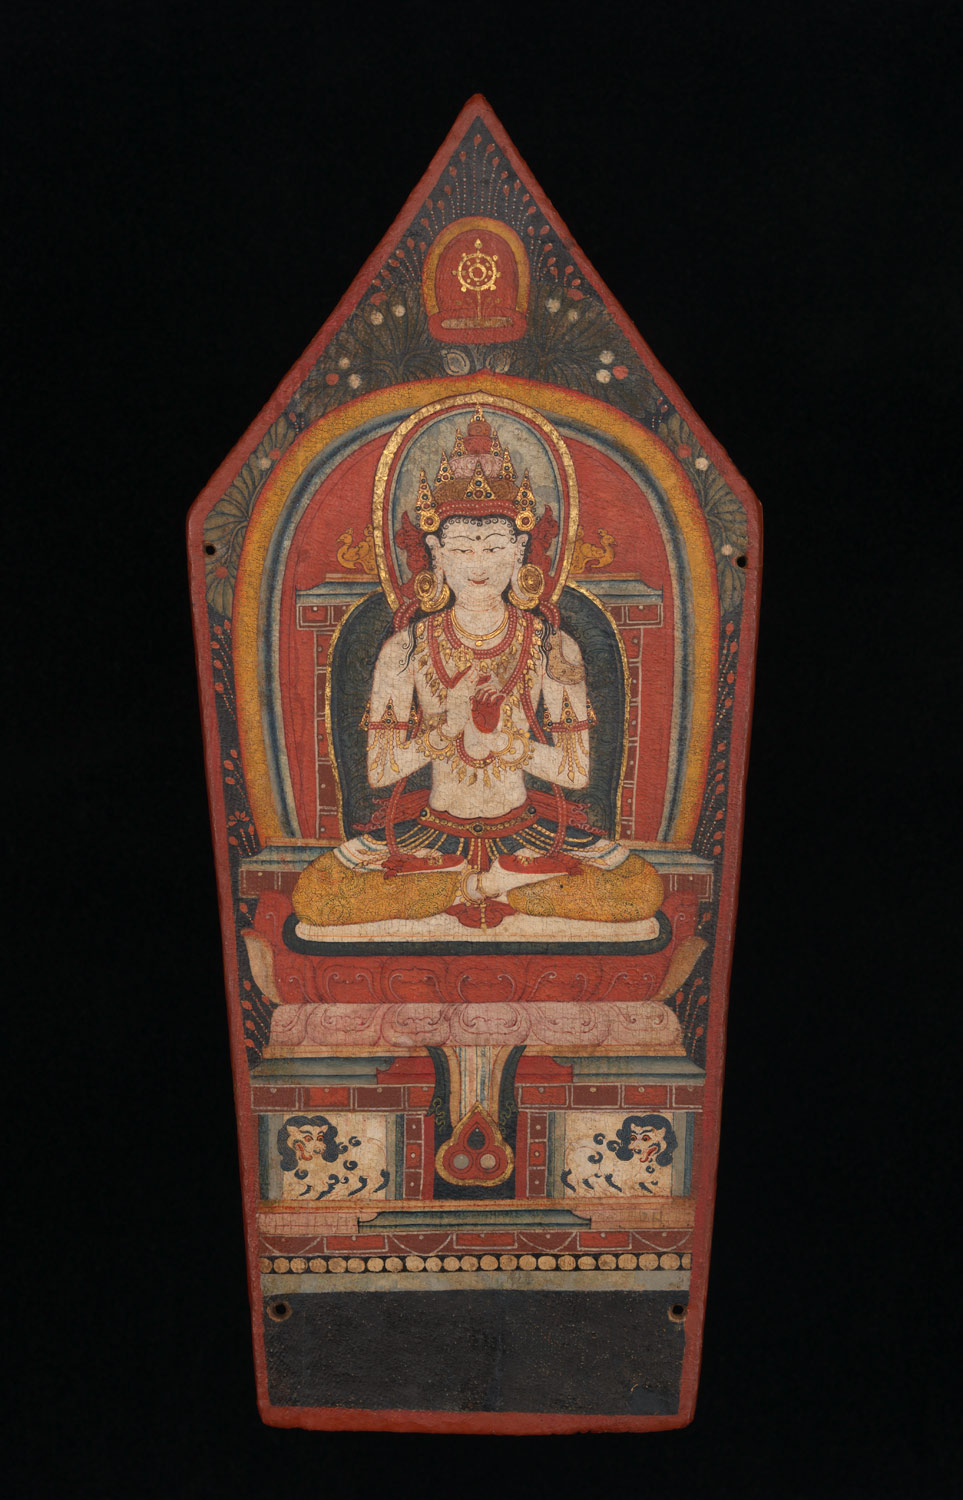 Panel from a Buddhist Ritual Crown Depicting Vairocana